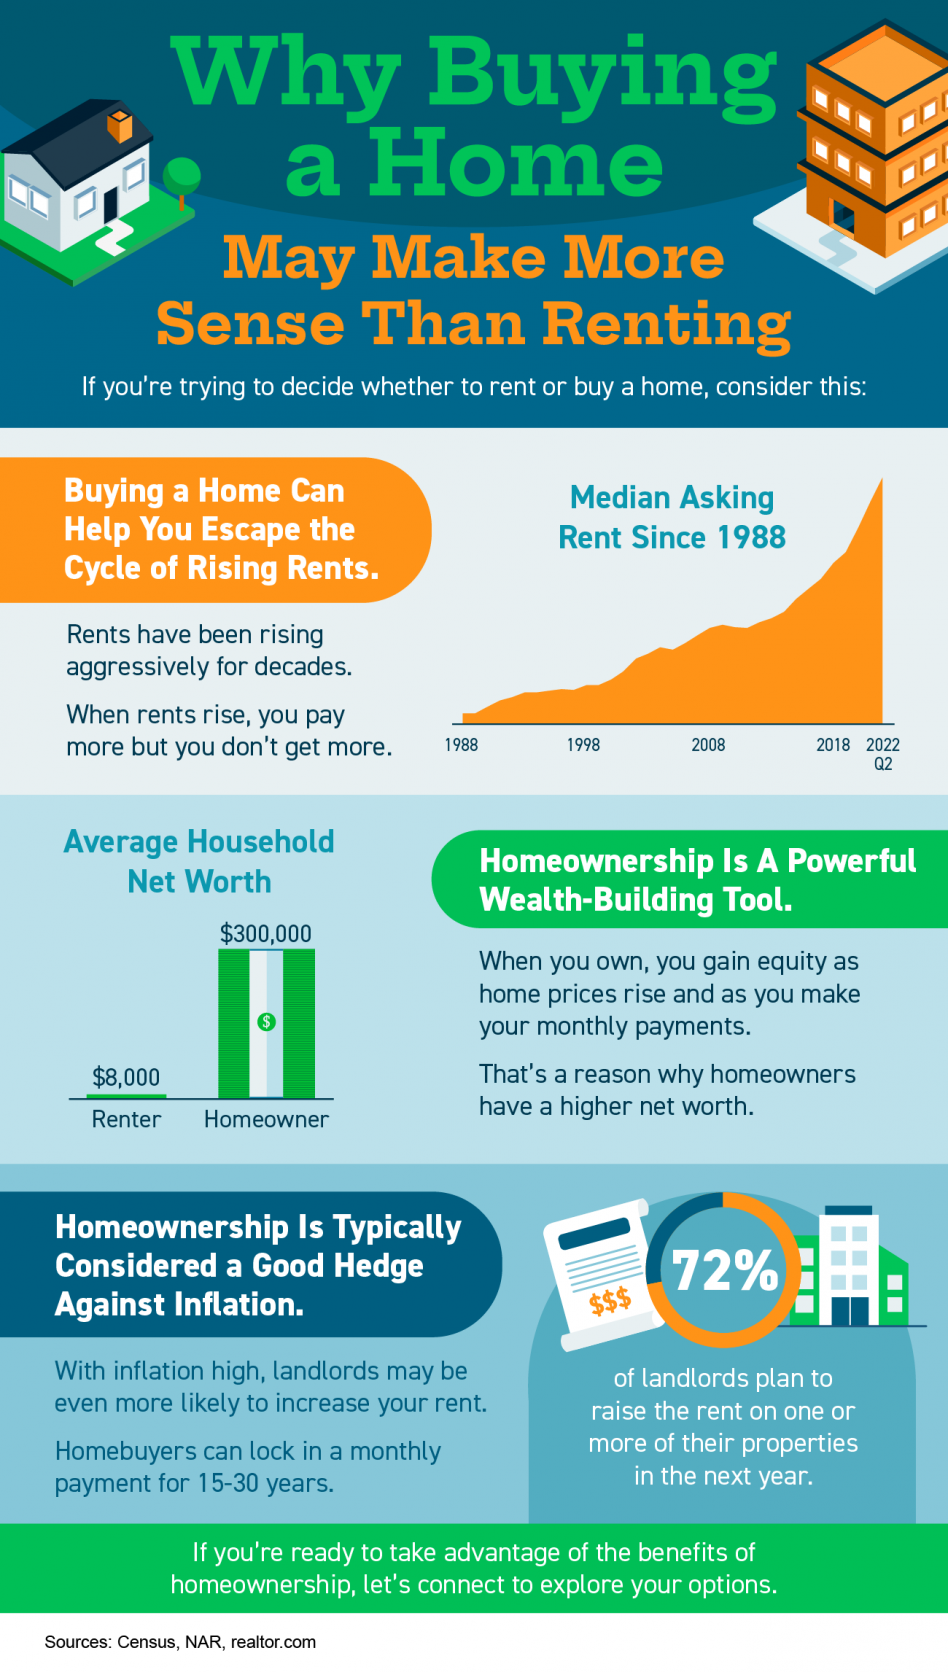 Why buying a home makes more sense than renting